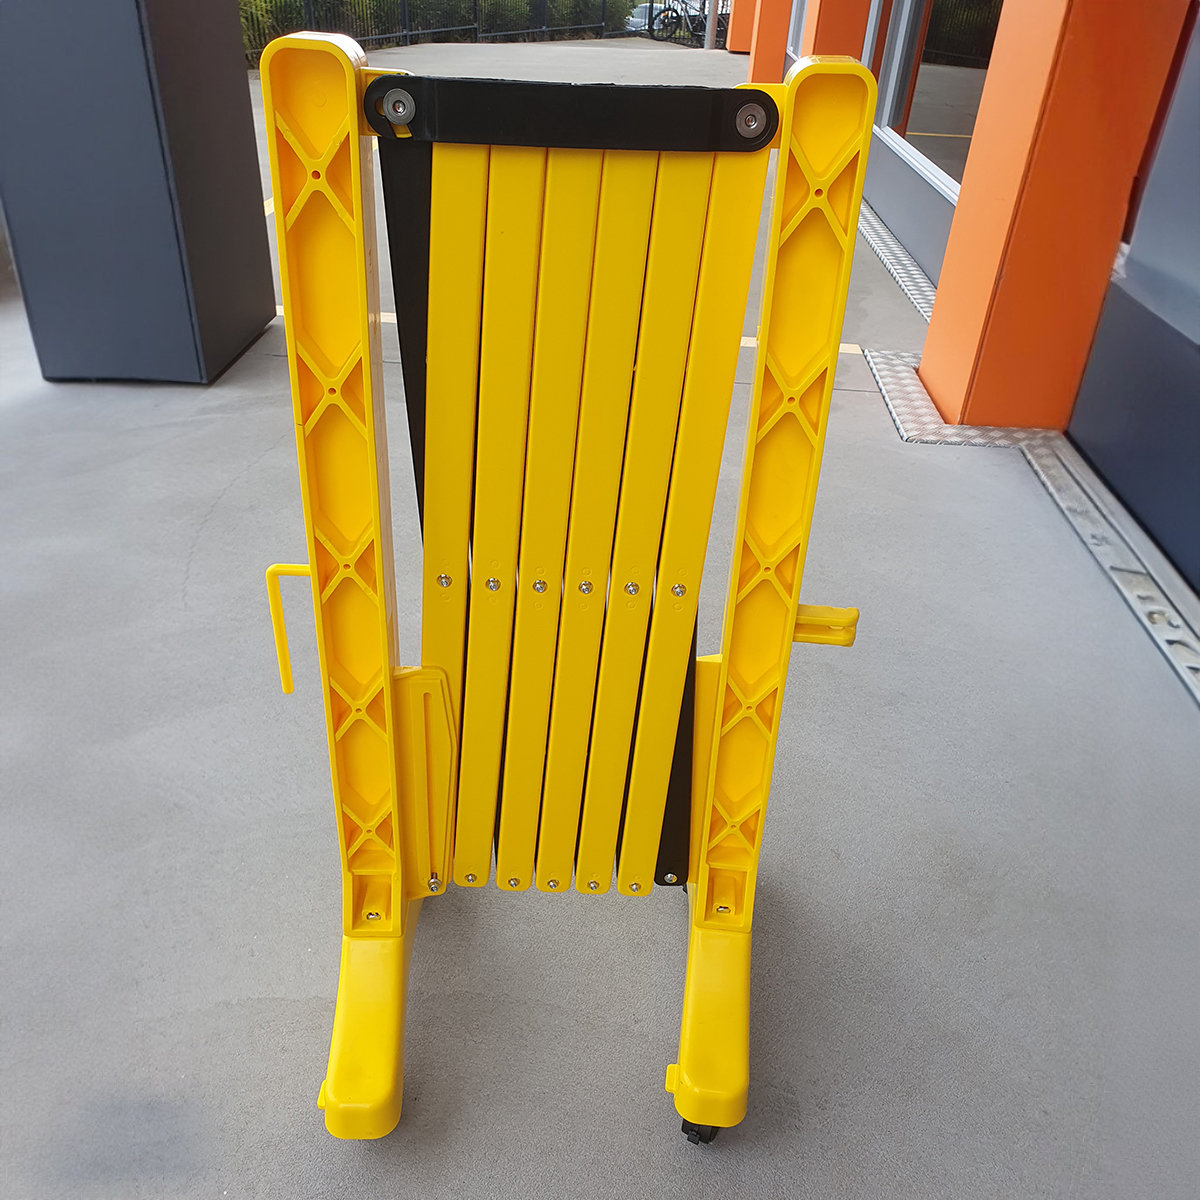 Buy Expandable Mobile Barrier Gate in Expandable Barriers from GuardX available at Astrolift NZ